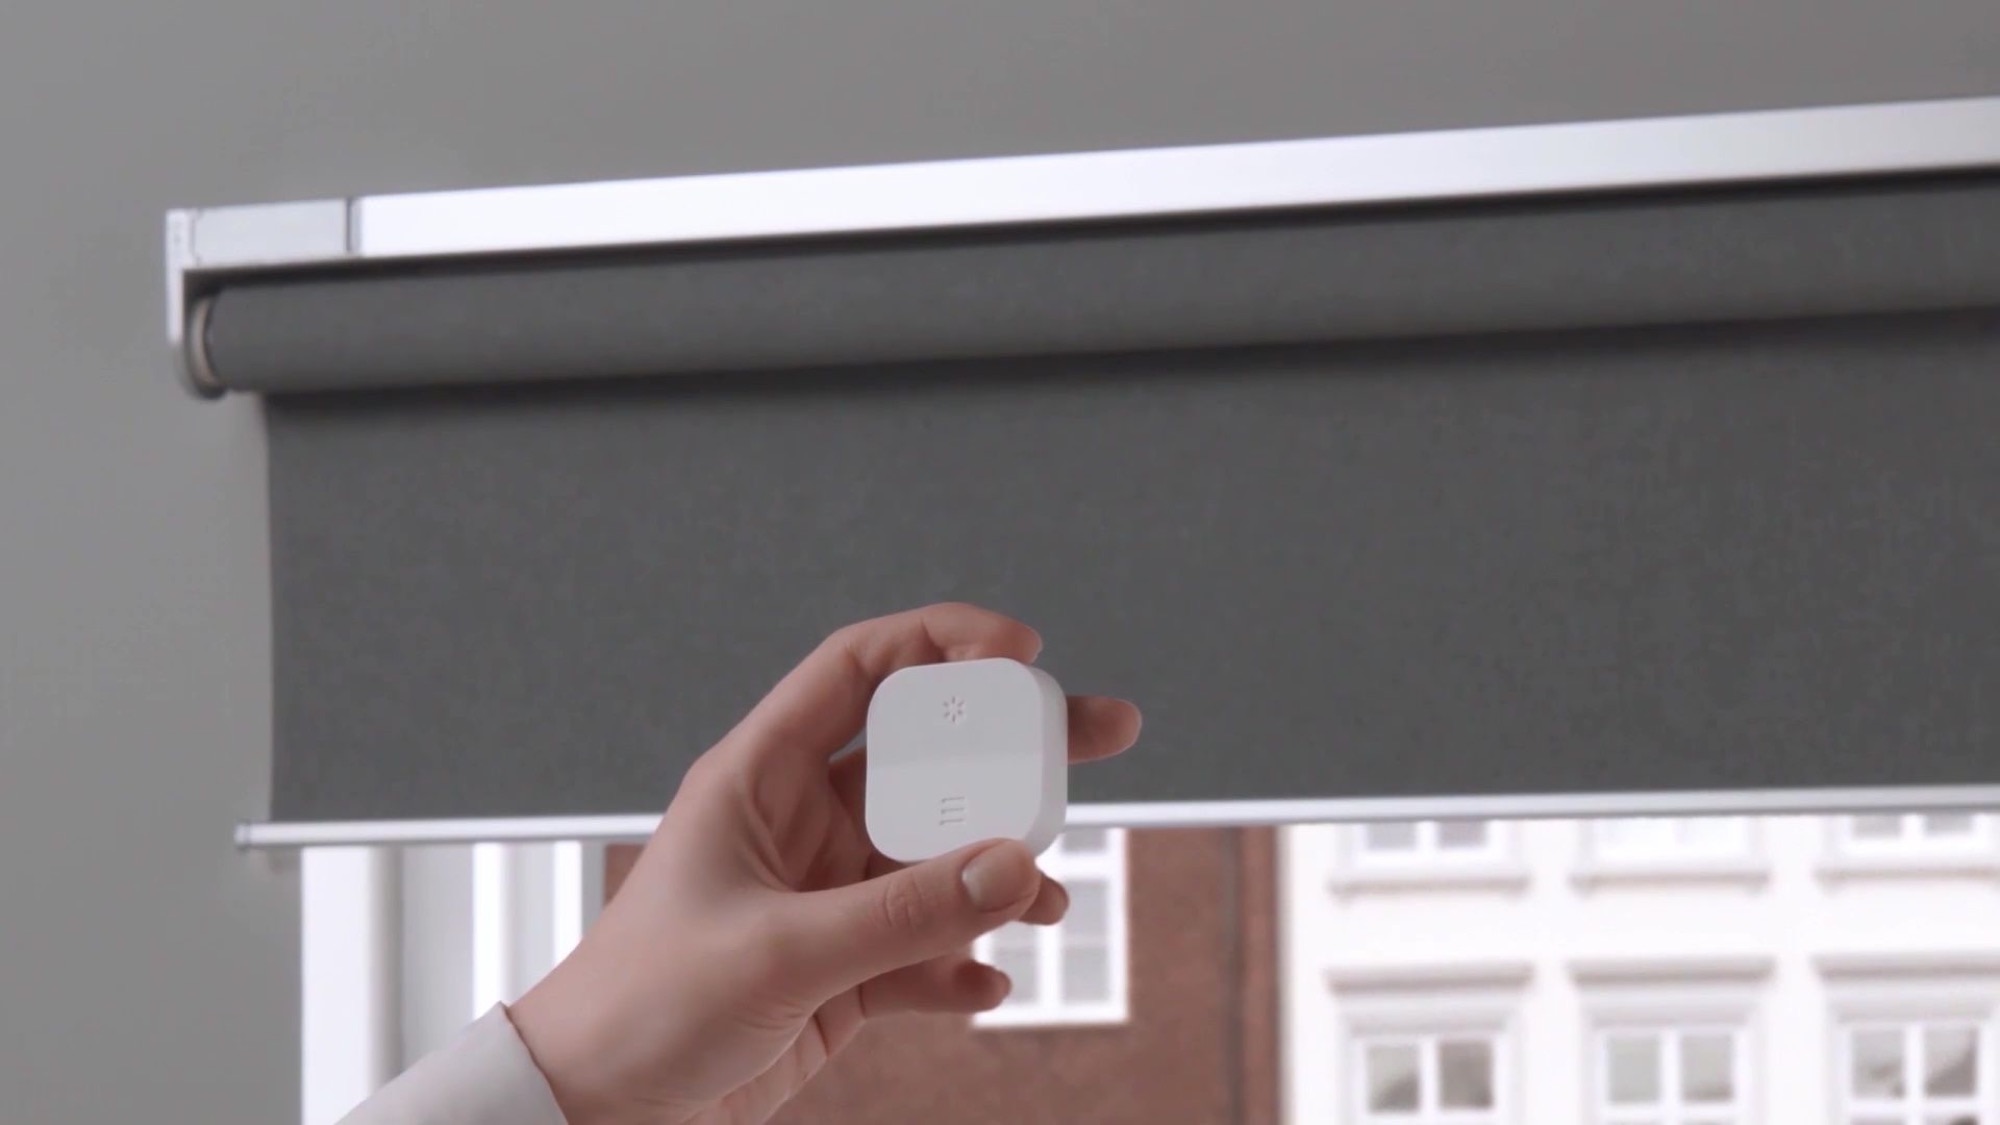 IKEA launches smart blinds motorized and